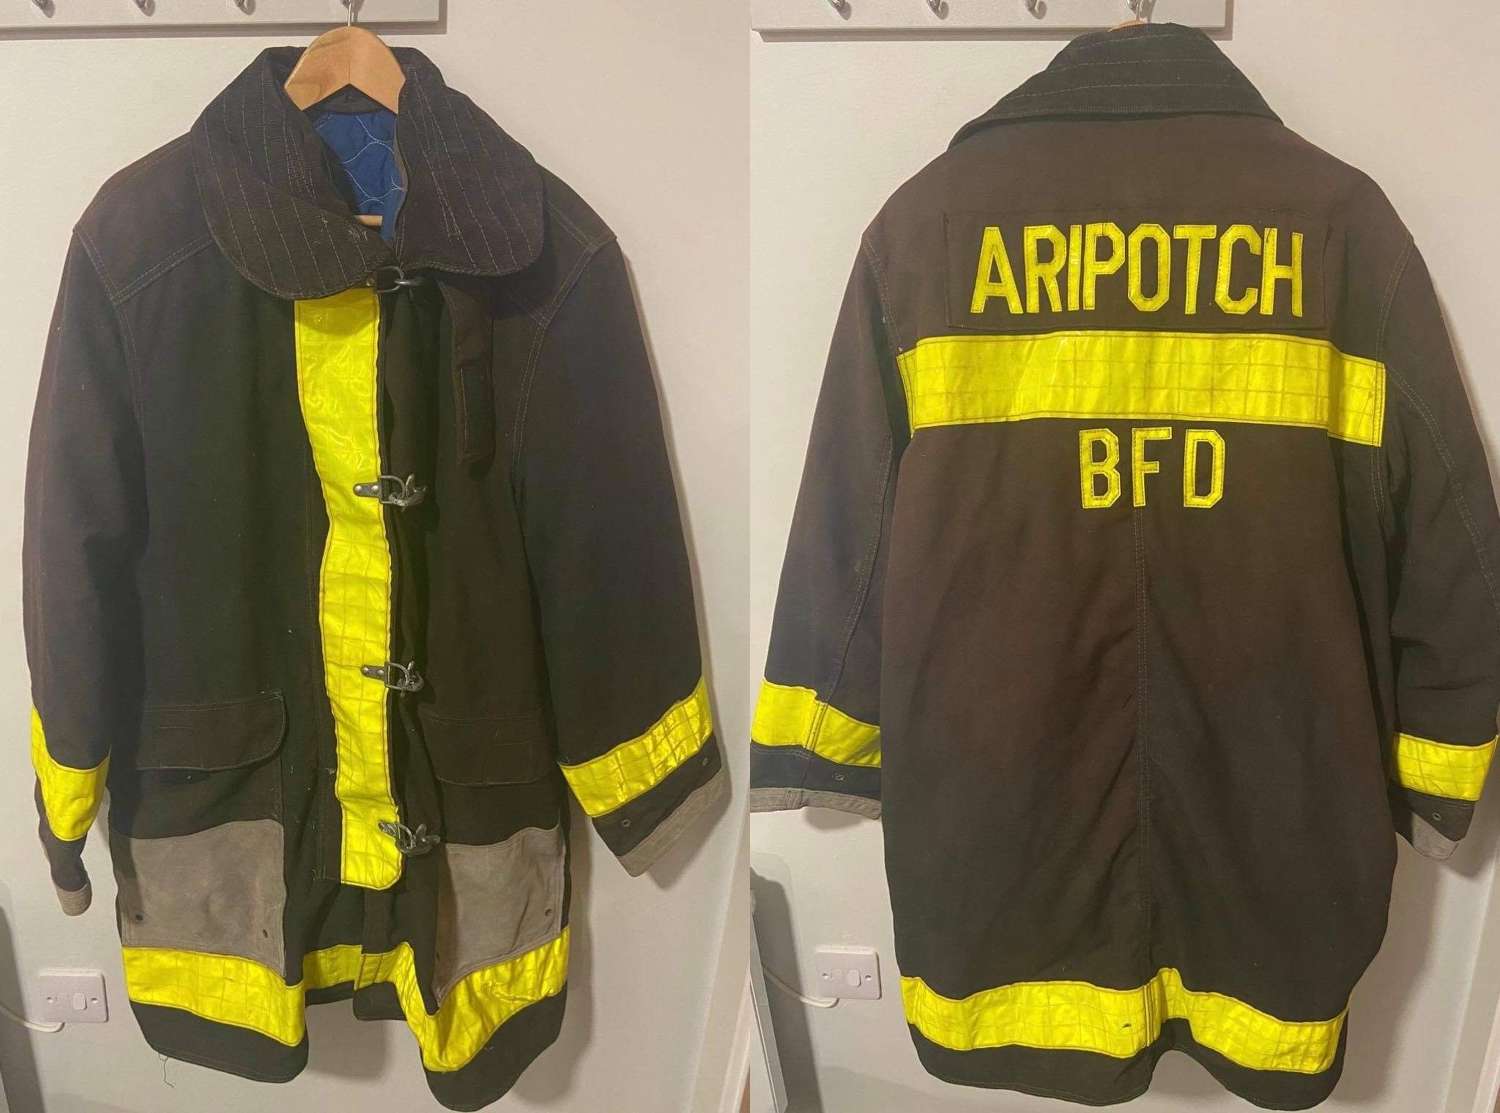 1989 Large Babylon Fire Department BFD Aripotch Turn Out Coat Jacket